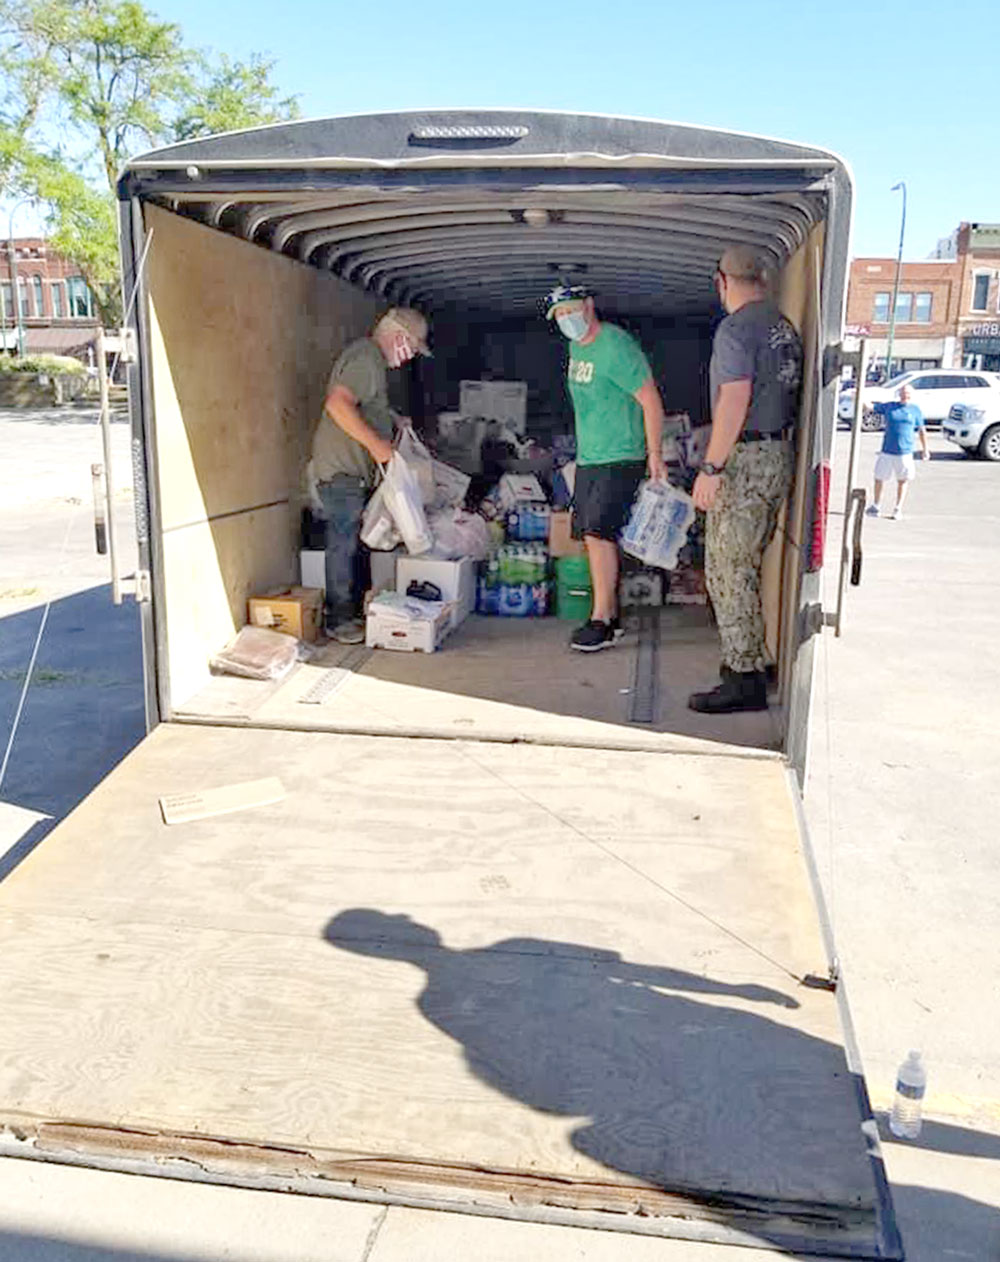 Charles City community sends trailer full of supplies to derecho victims; will do it again